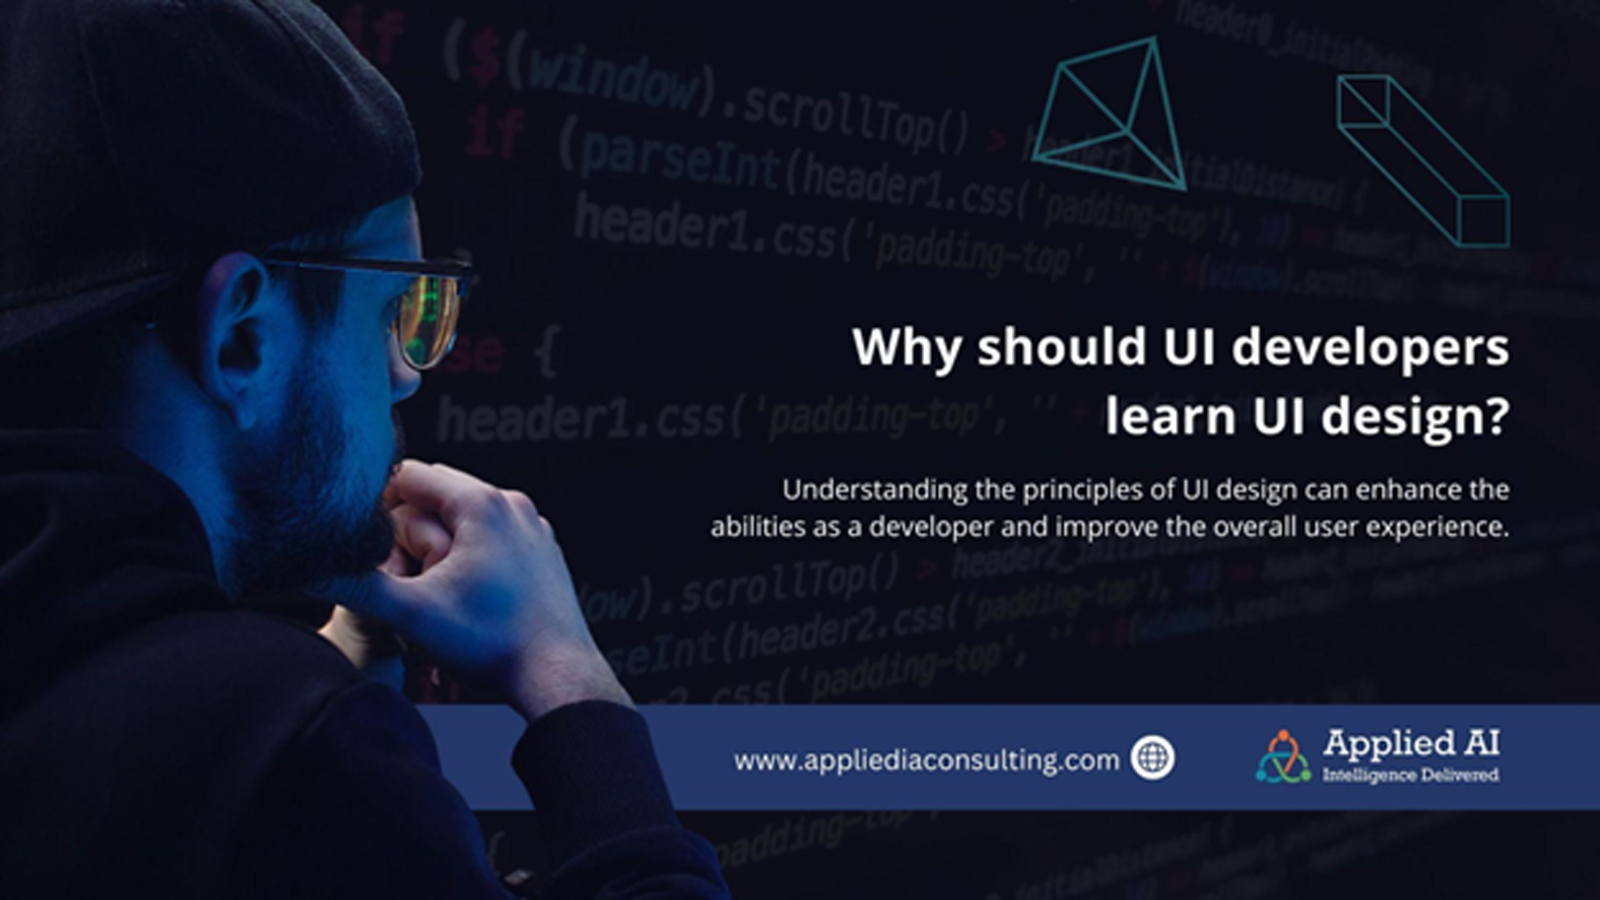 why should UI developers learn UI design?